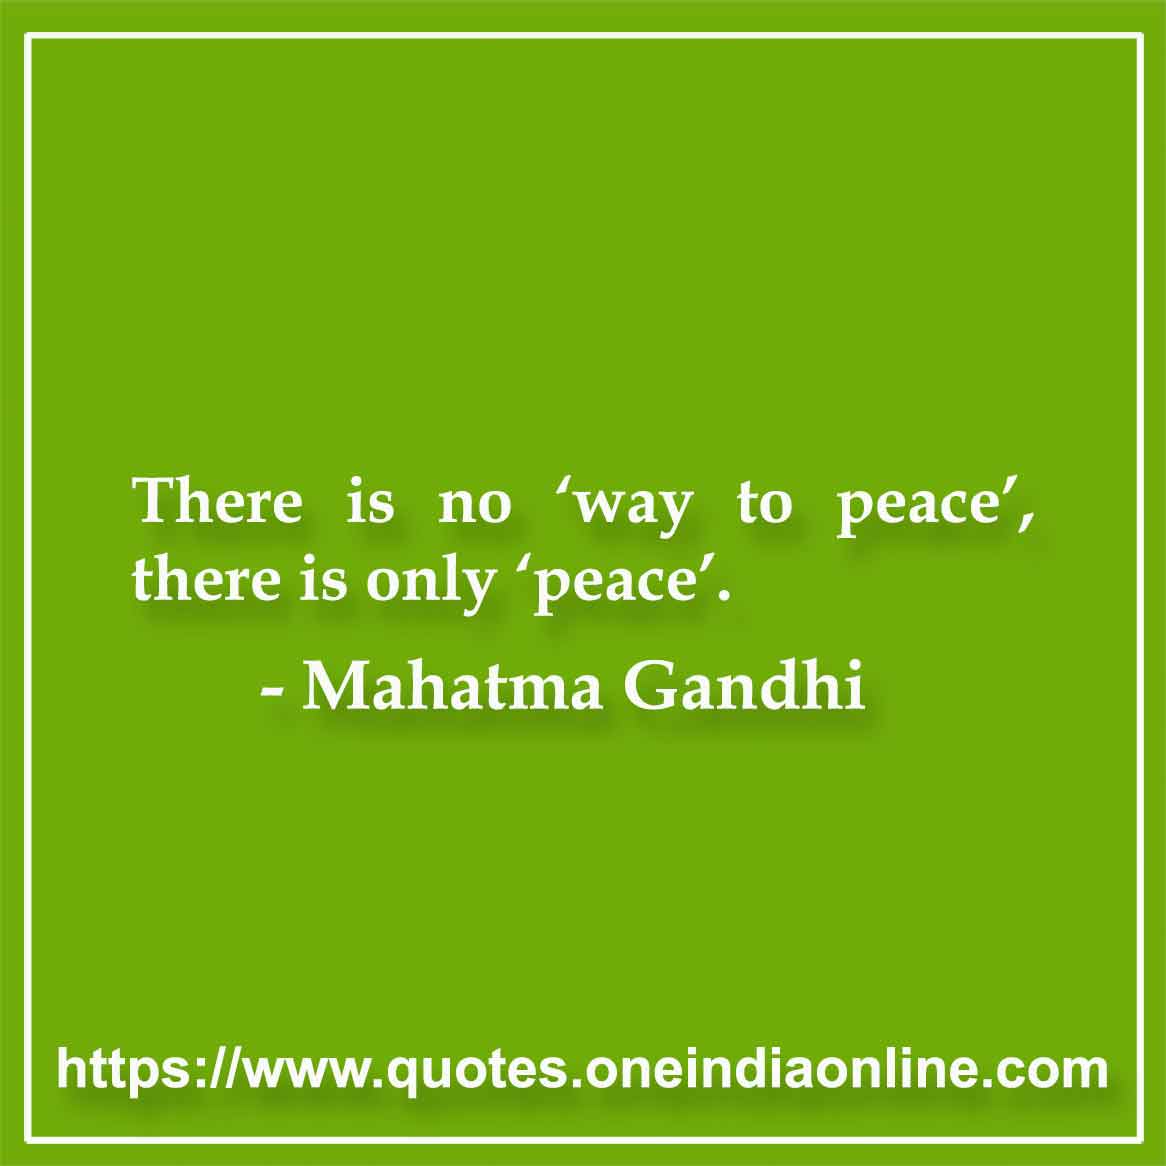 Mahatma Gandhi Quotes in English Quotations and Sayings